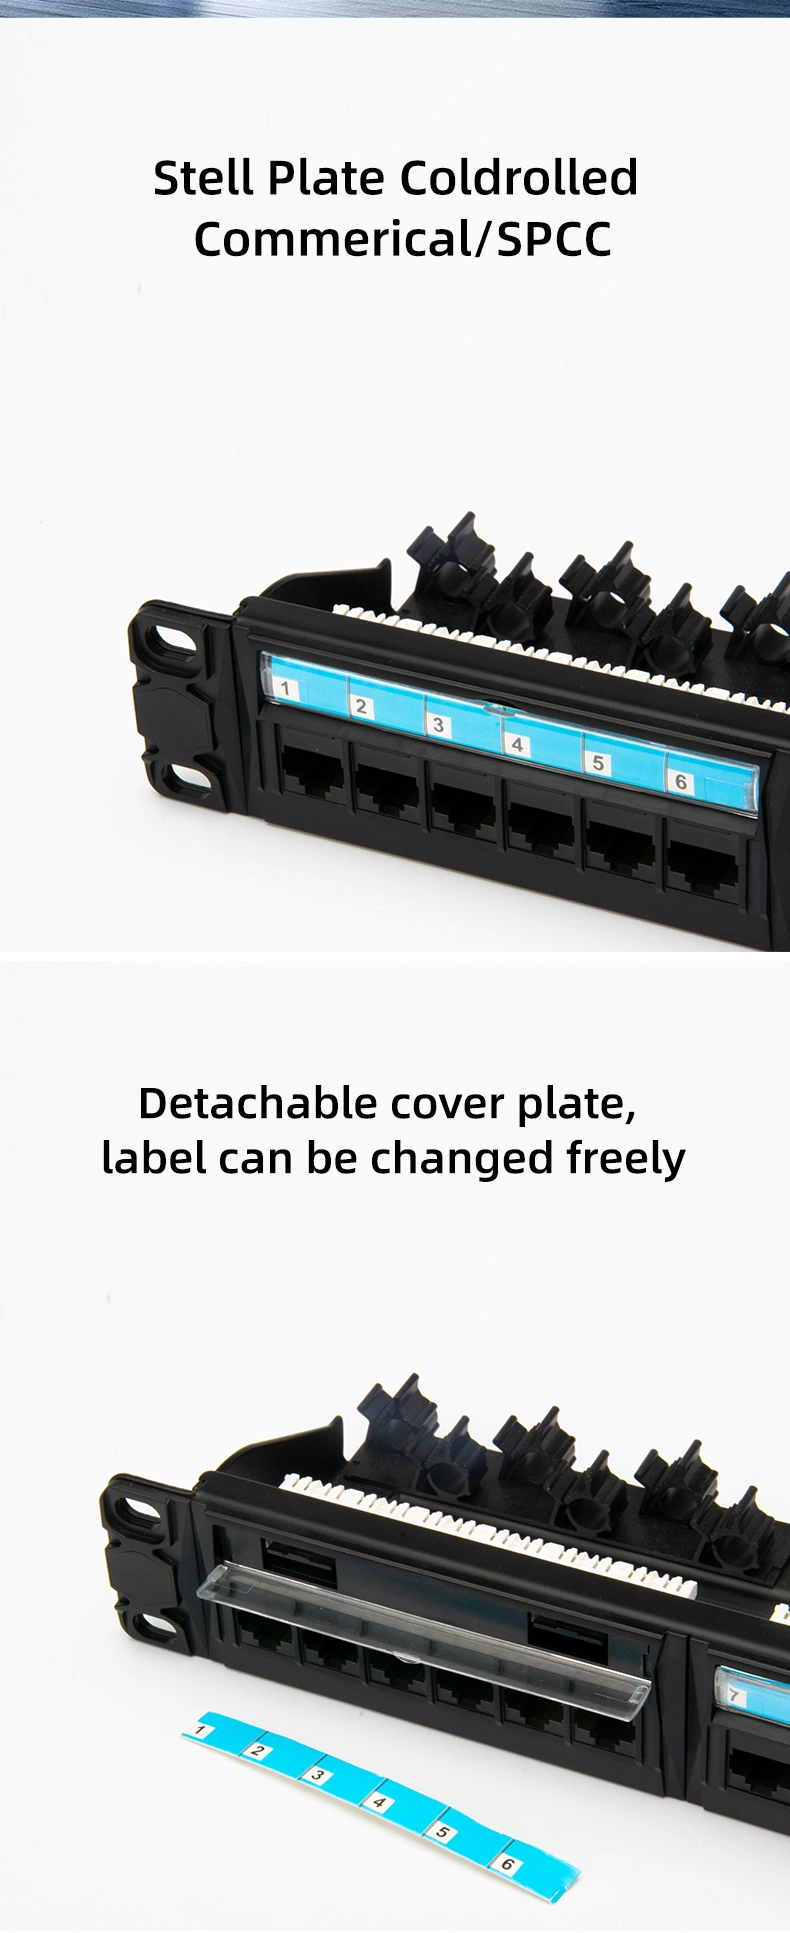 Network High Quality 24 Port UTP Dust Cap Modular Patch Panel with Back Bar